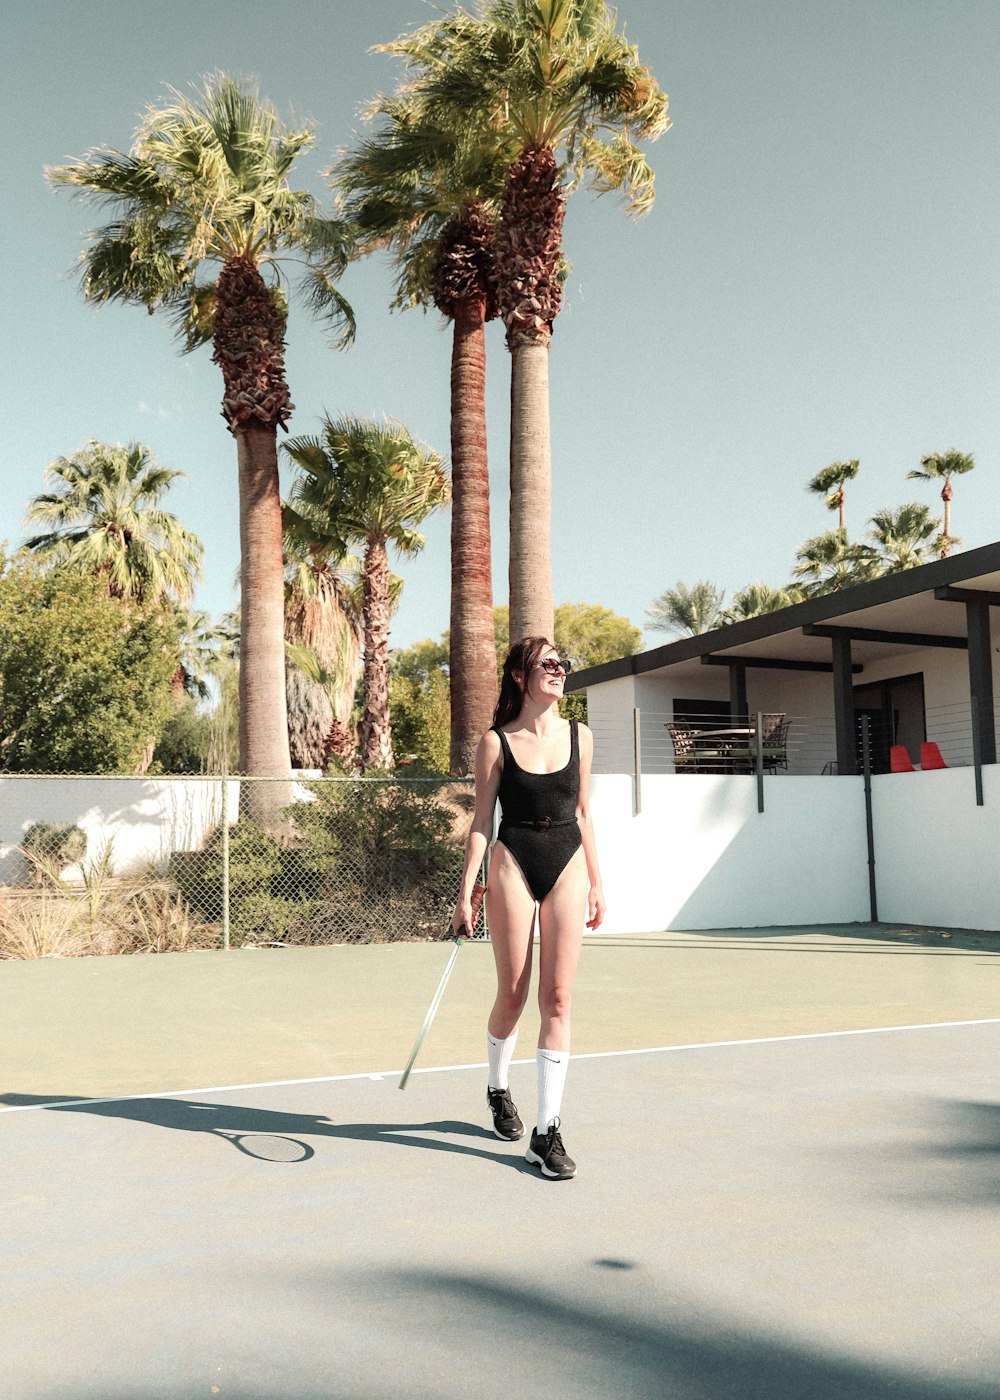 woman in black sports bra and black shorts standing on white basketball court during daytime